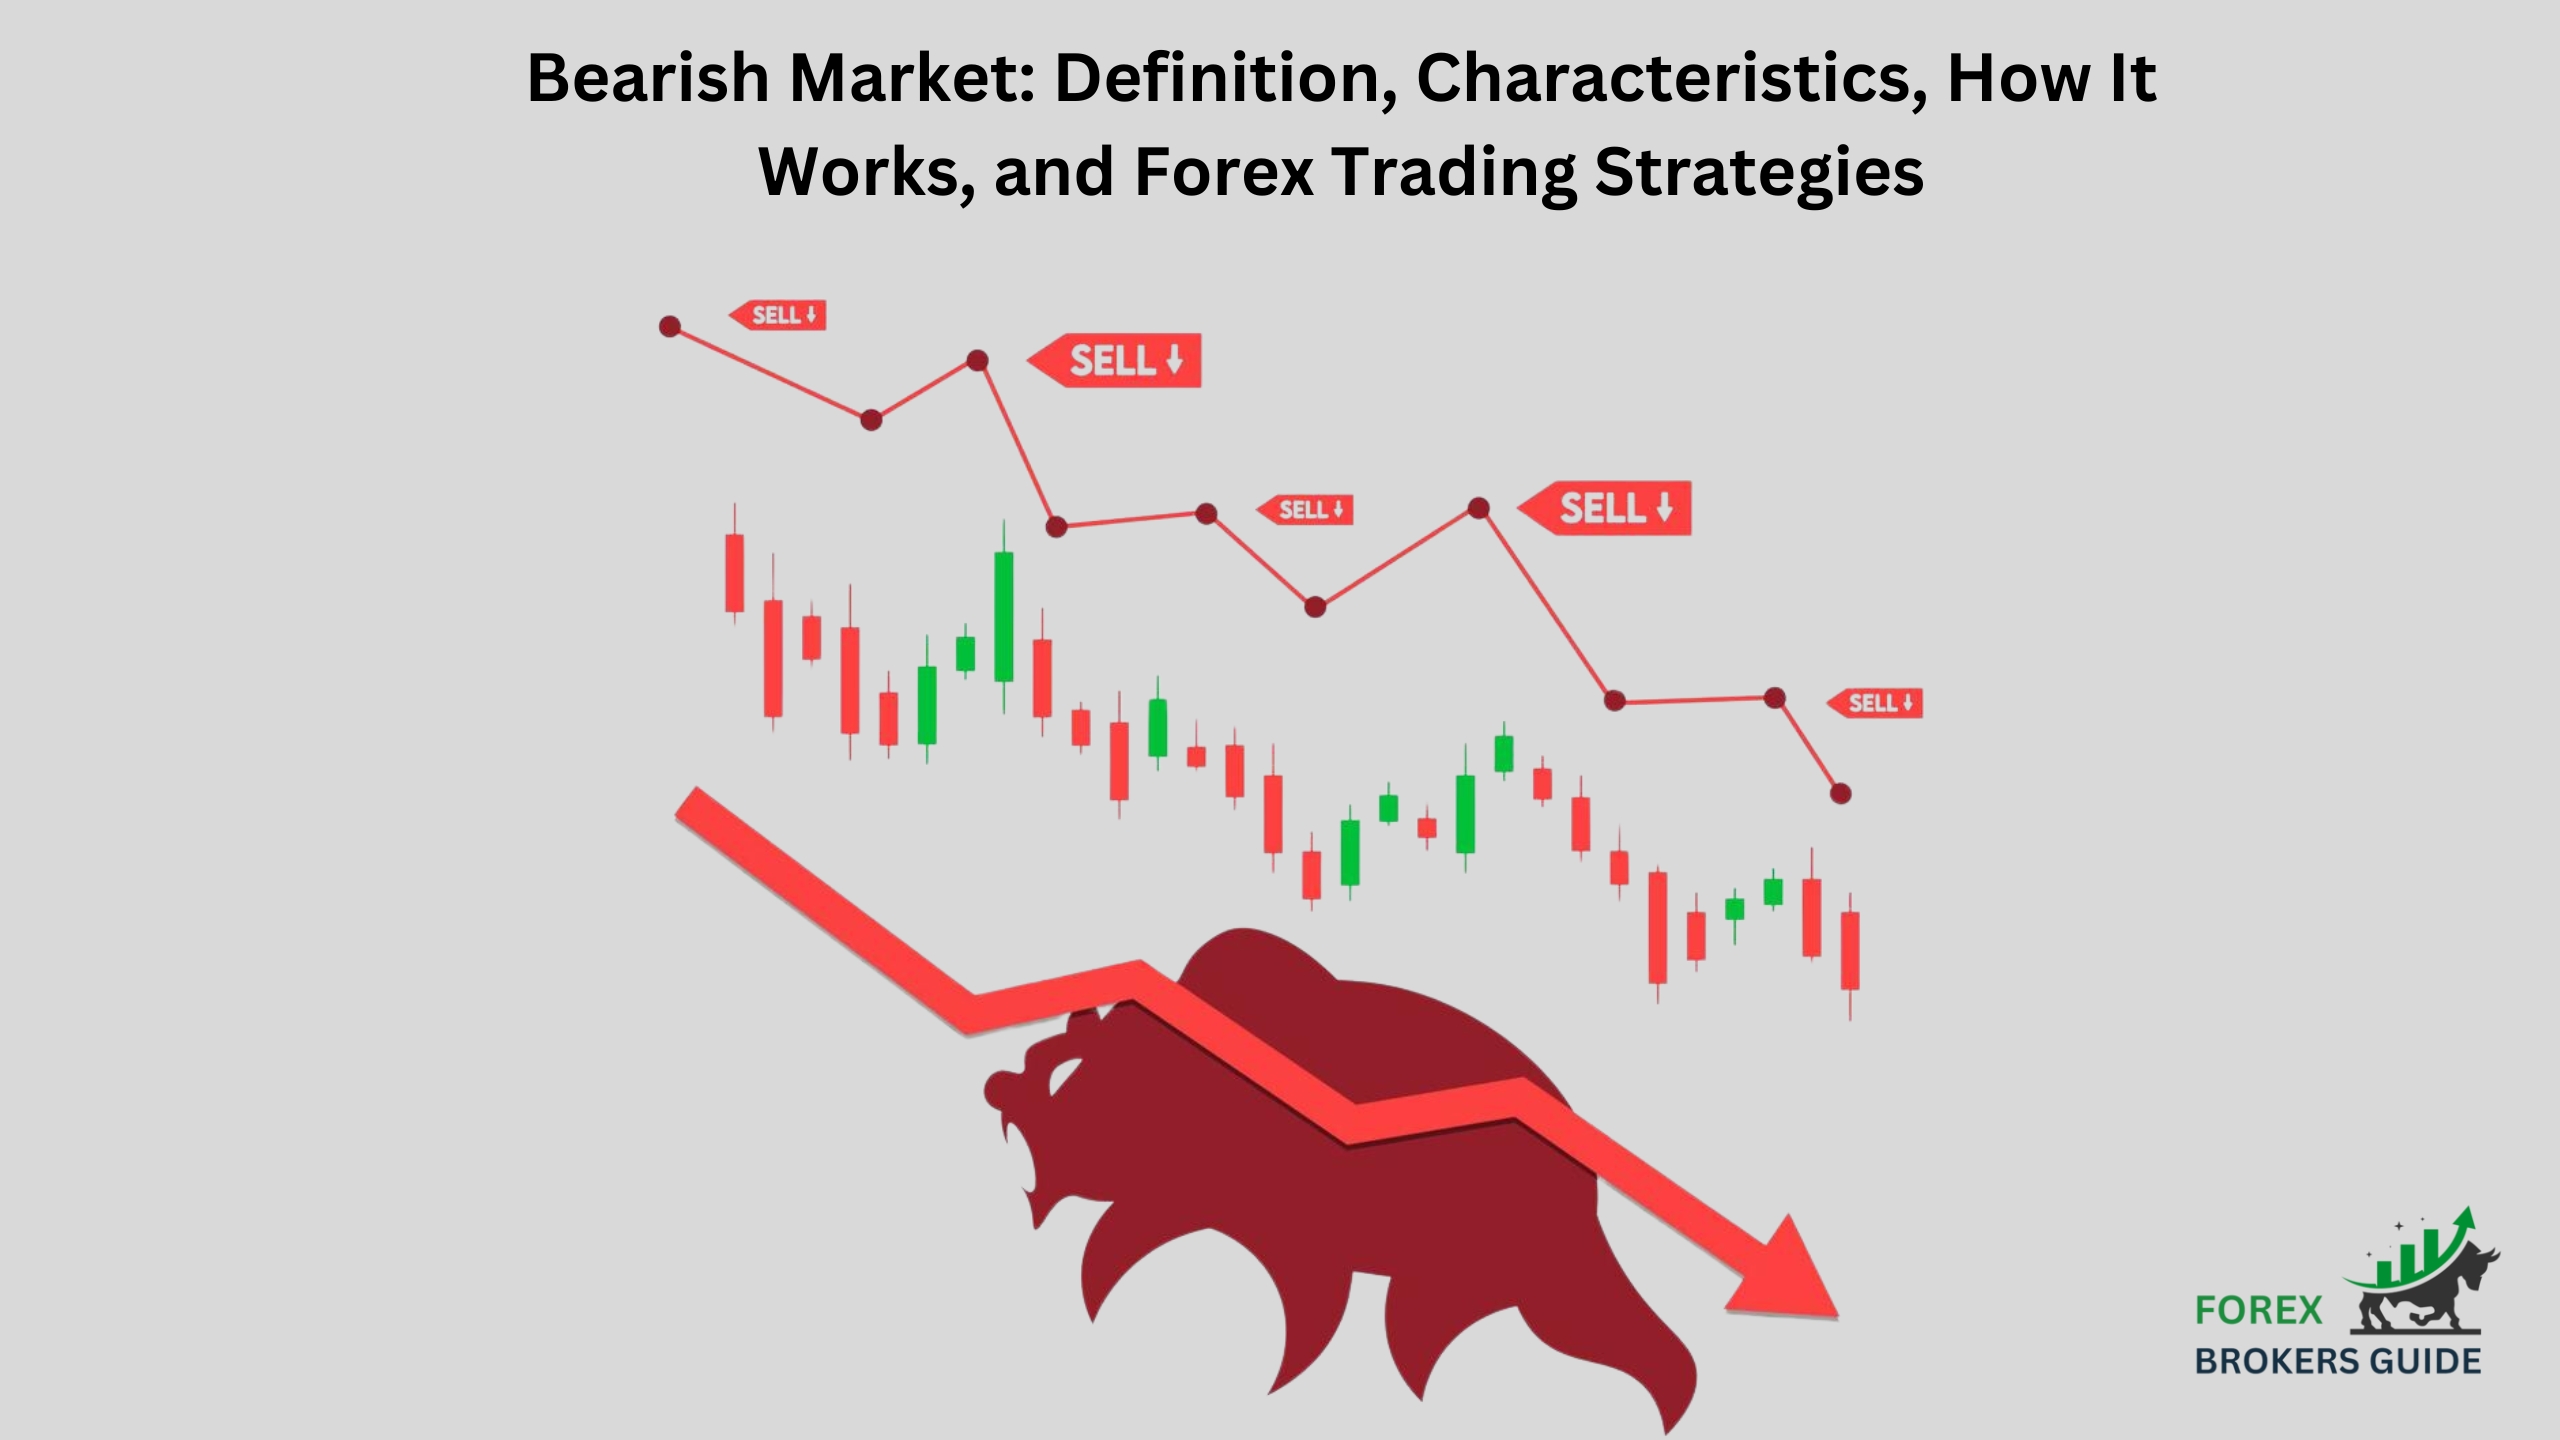 Bearish Market Definition, Characteristics, How It Works, and Forex Trading Strategies